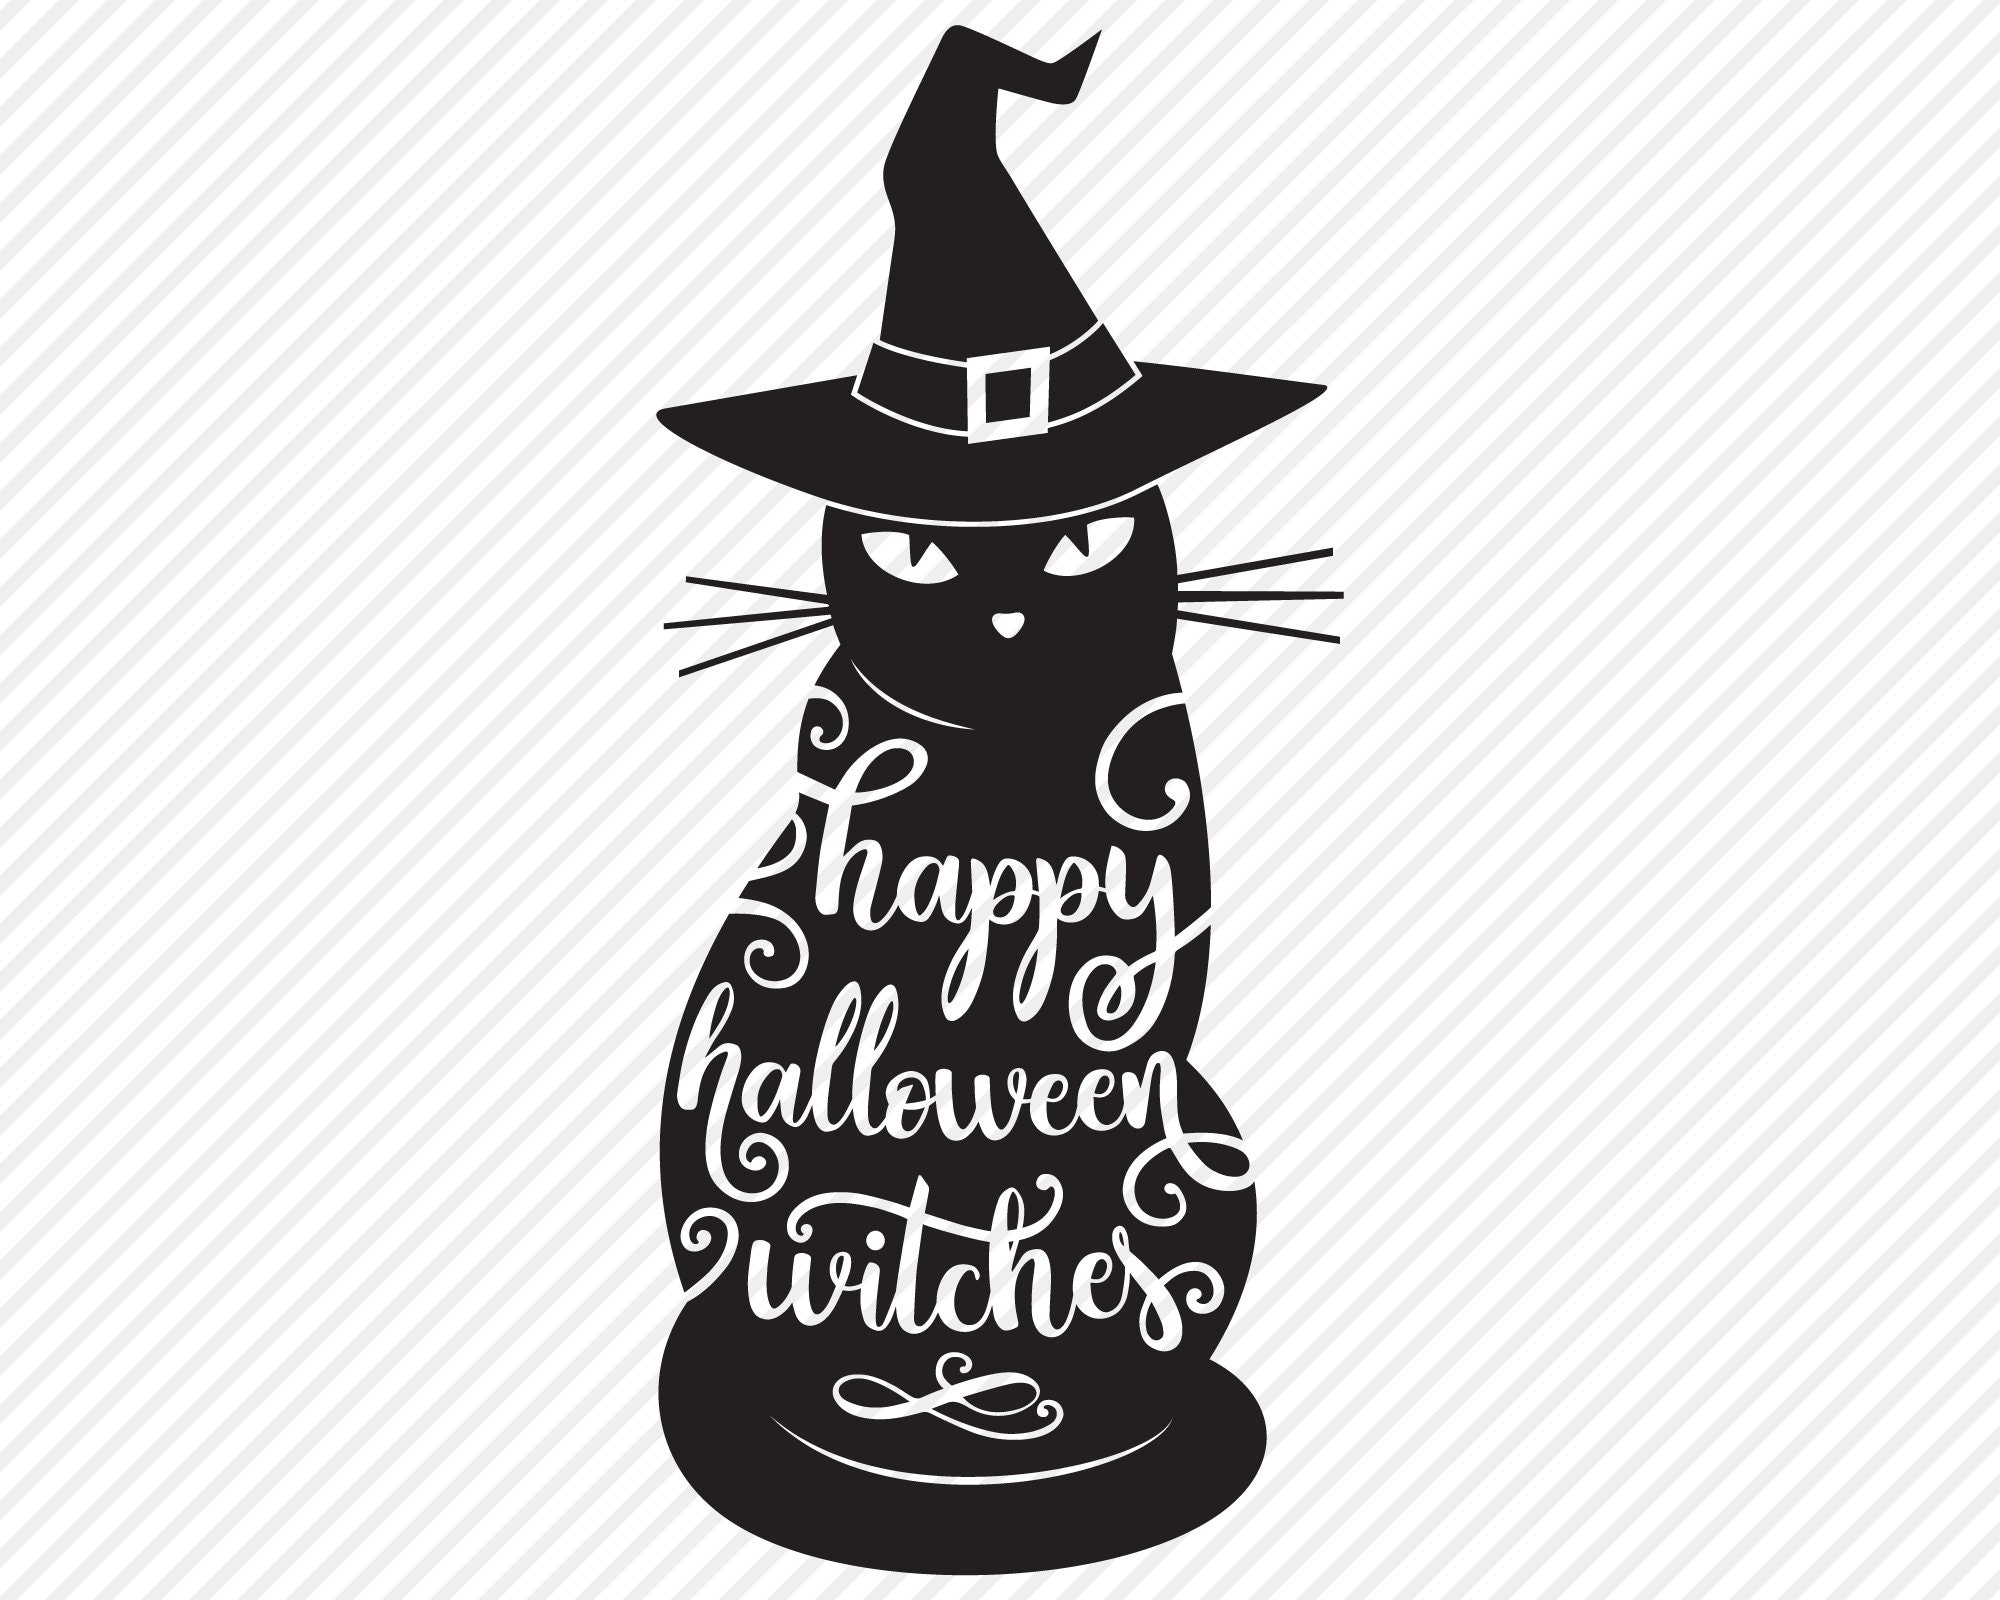 Happy Halloween Witches SVG Cut File Halloween Shirt Design | Etsy